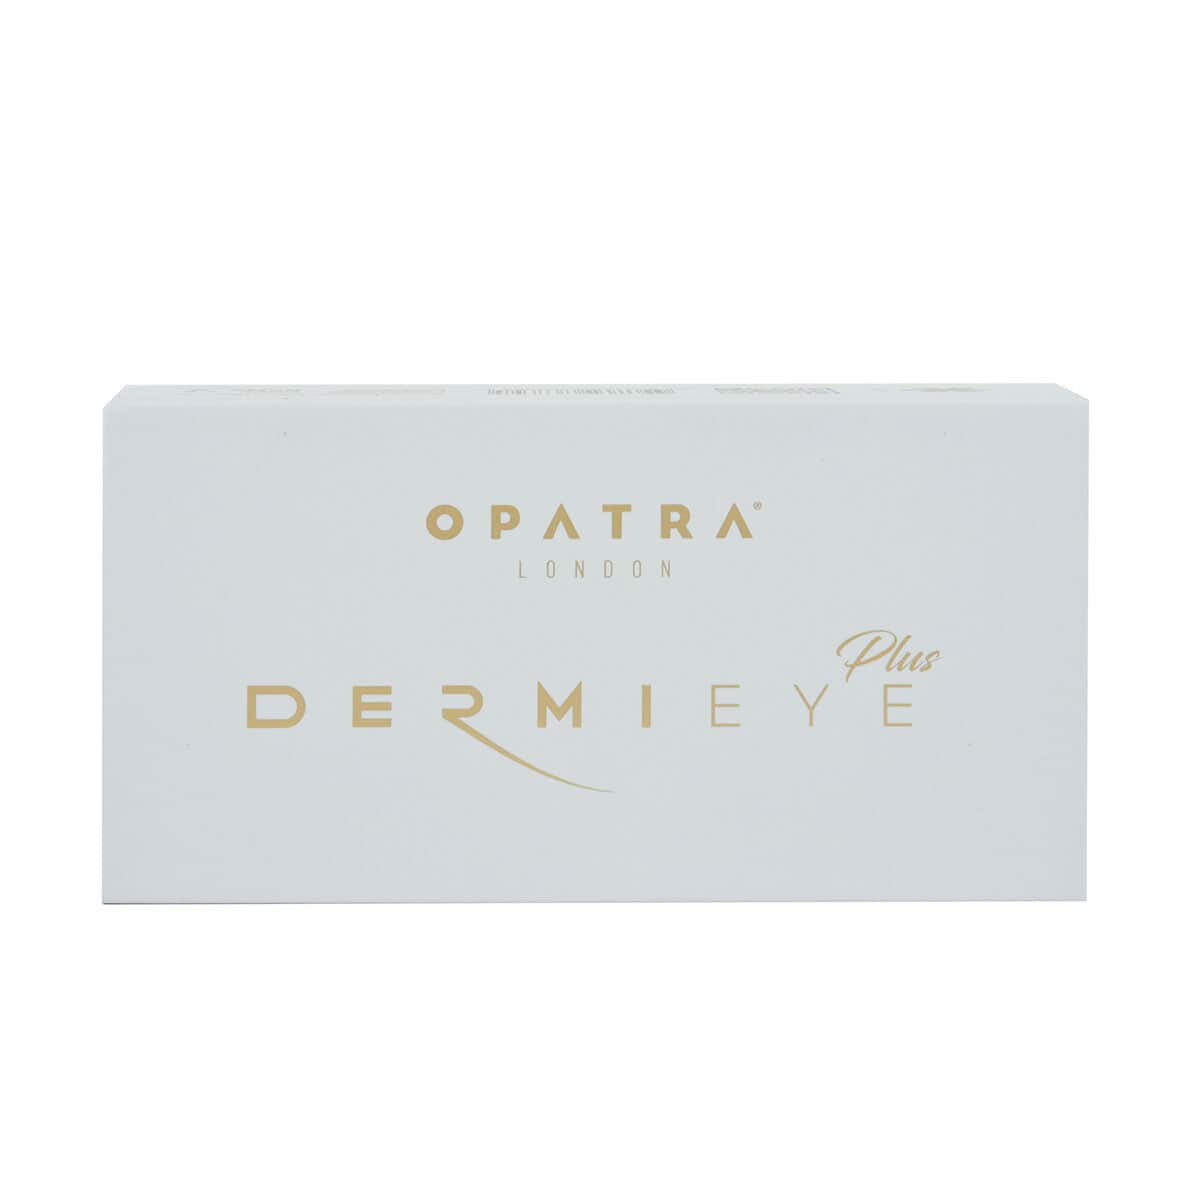 Opatra DermiEye Plus with Massage, Heat & LED Light Therapy (Lifetime Warranty) image number 4